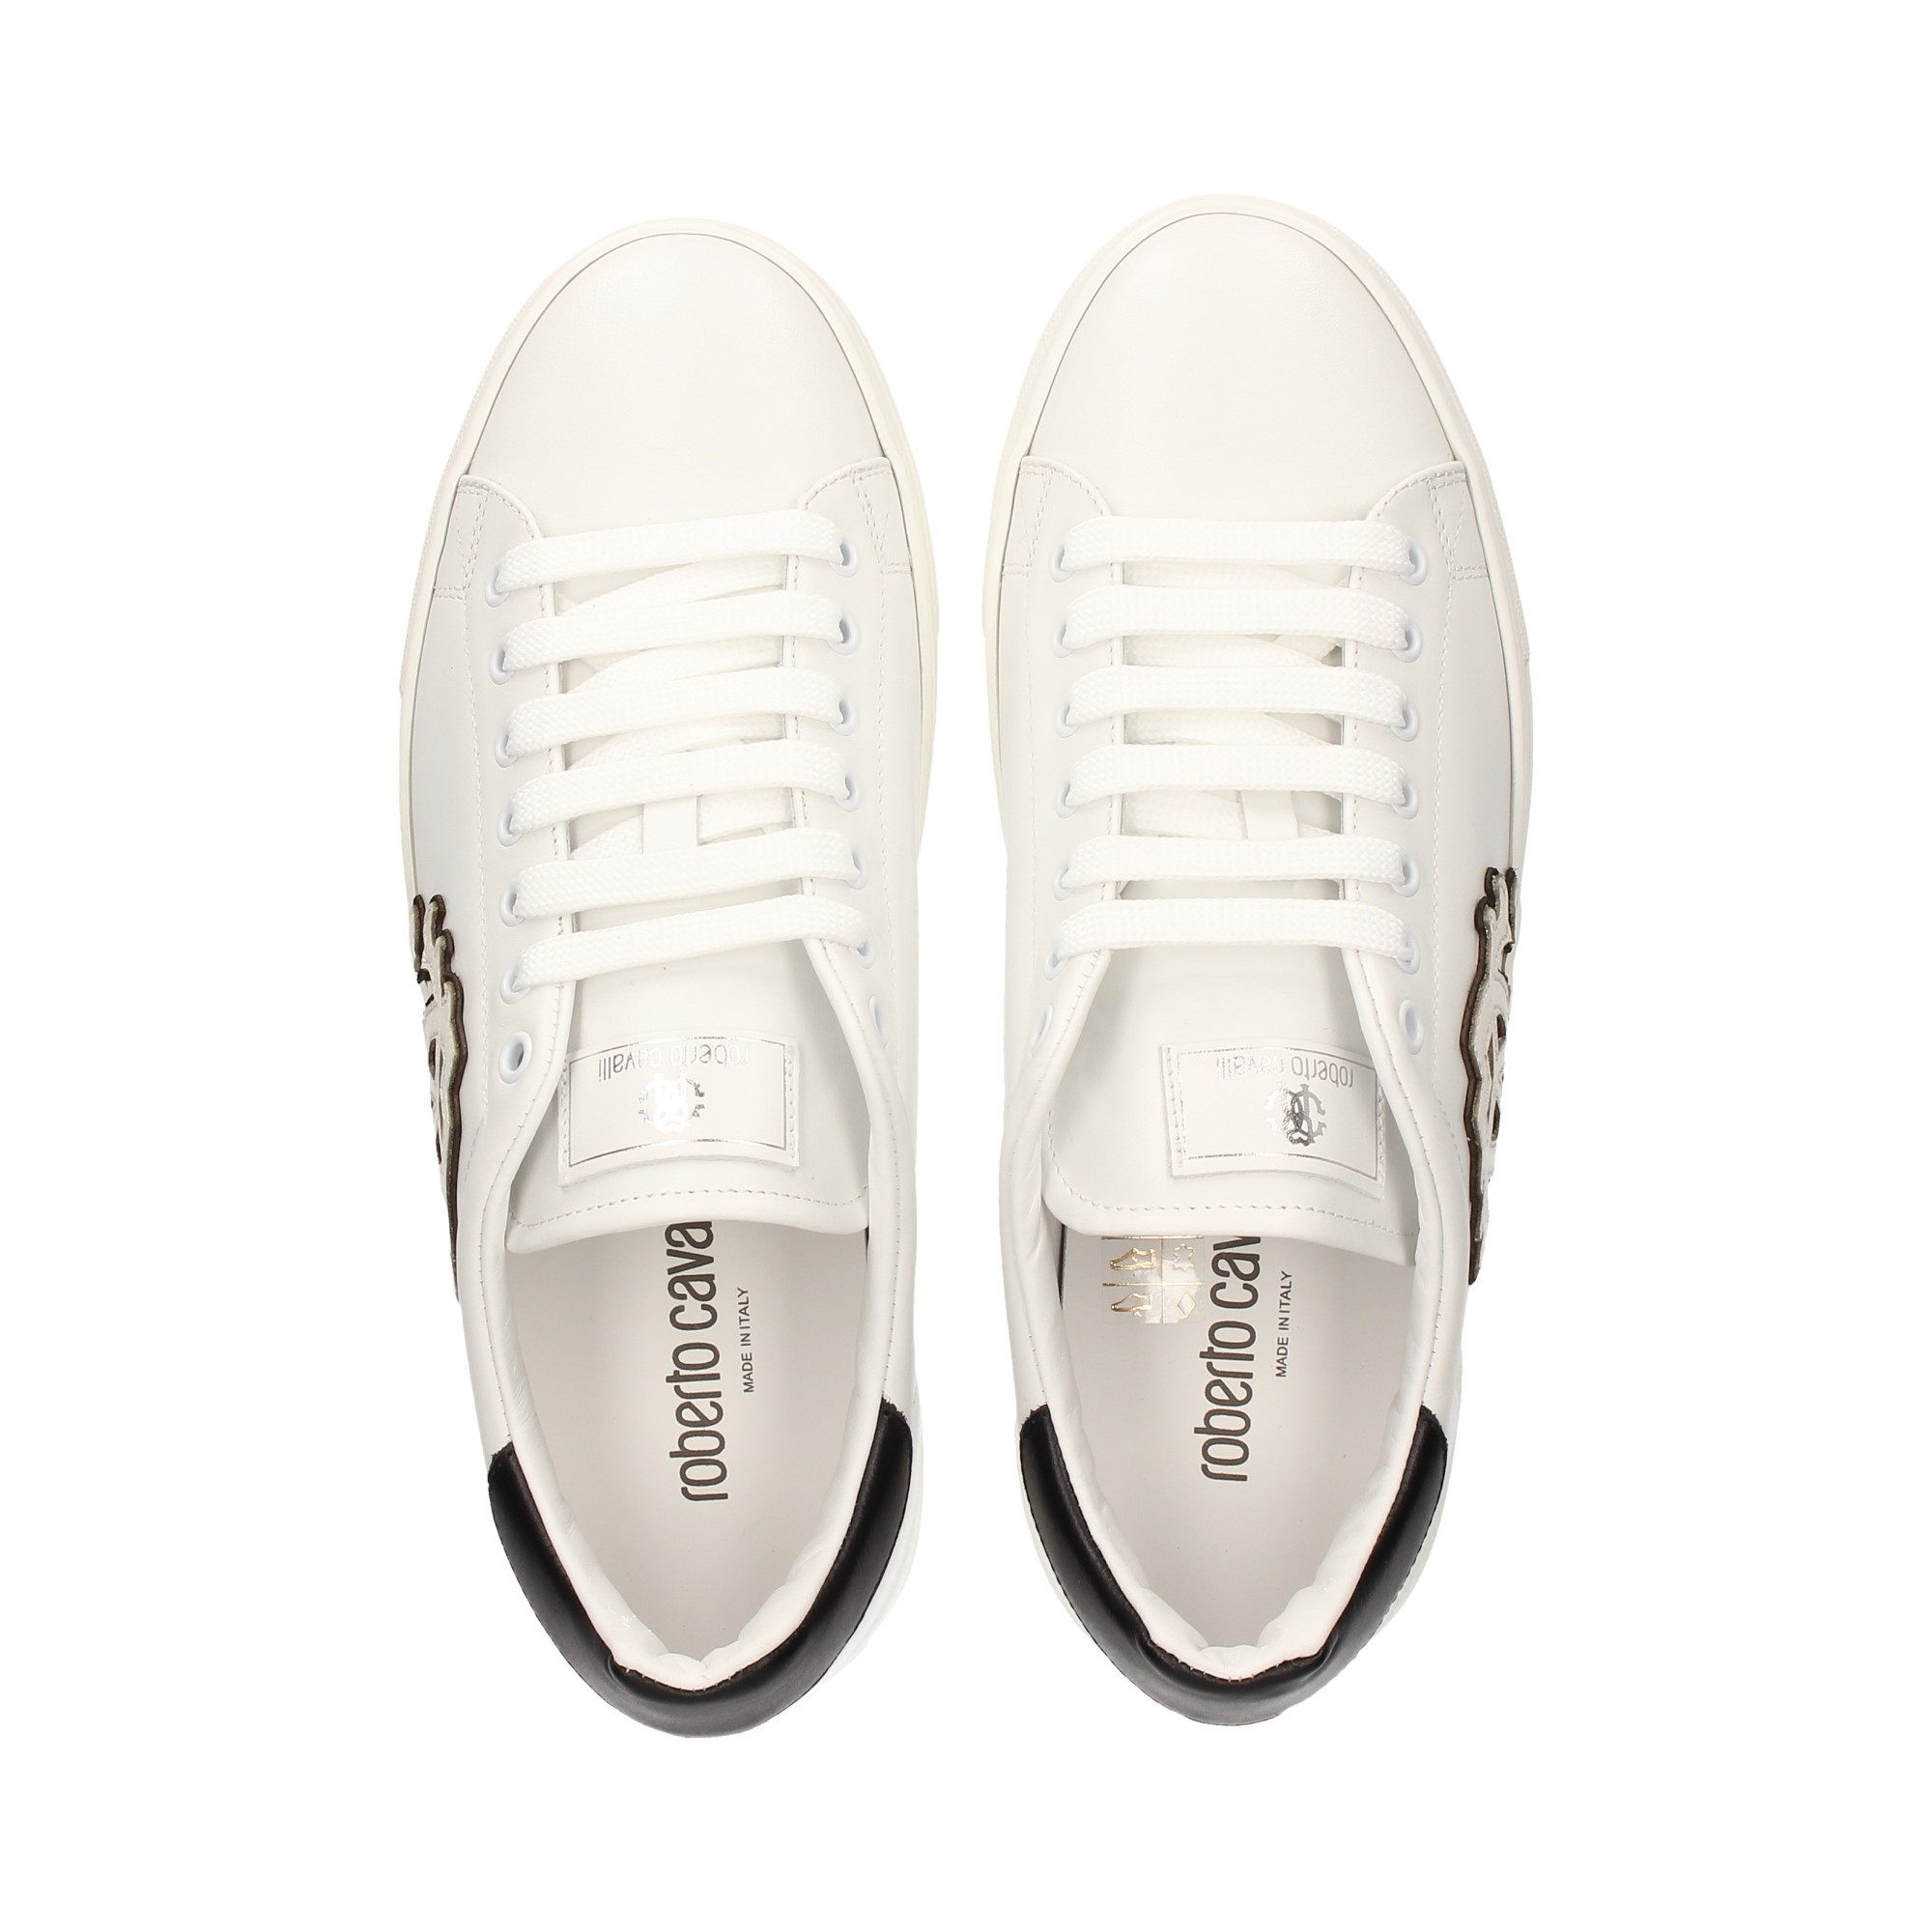 sporty-white-side-leather-logo